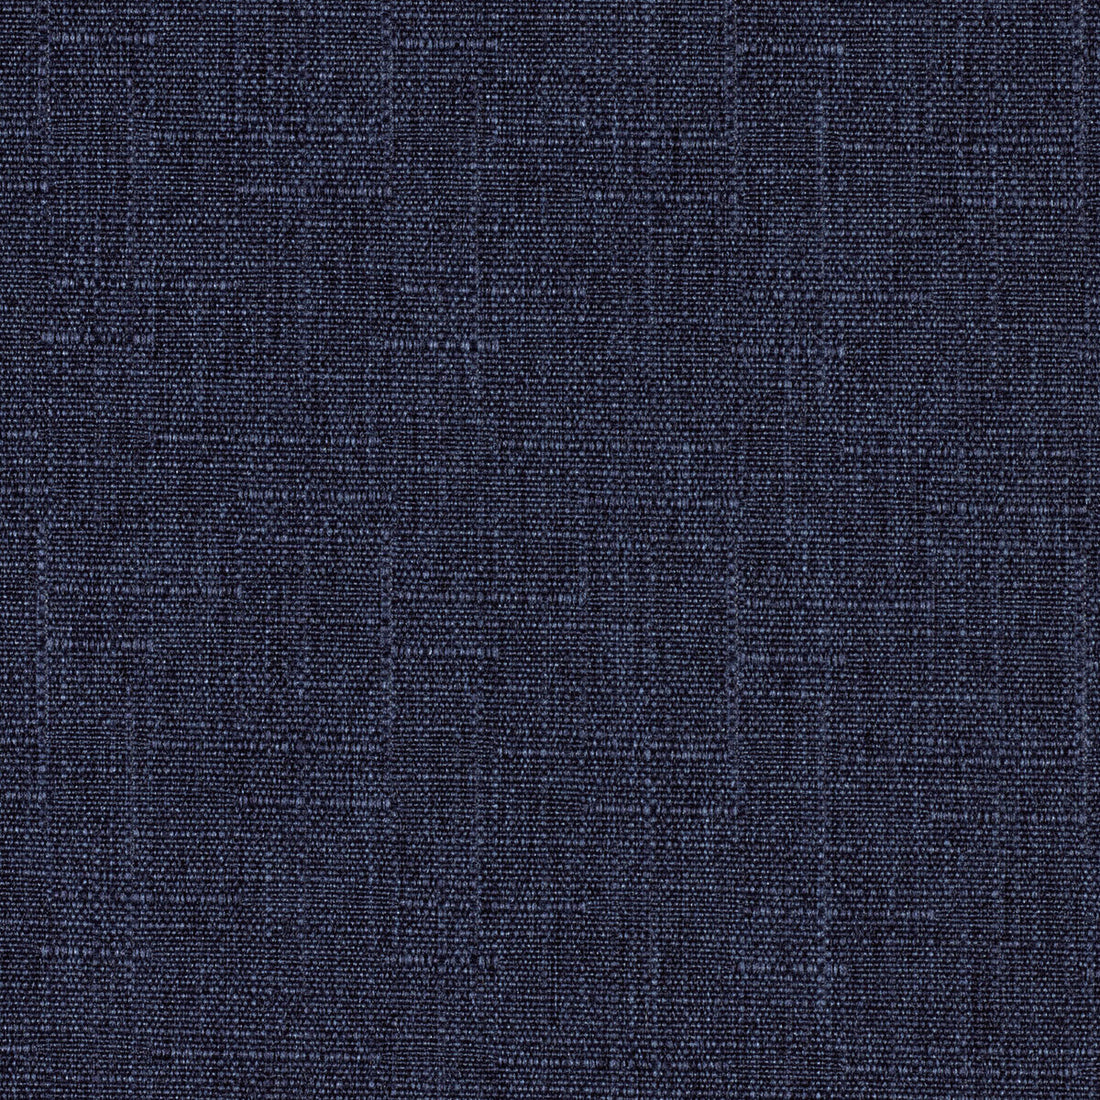 Kravet Contract fabric in 4321-50 color - pattern 4321.50.0 - by Kravet Contract